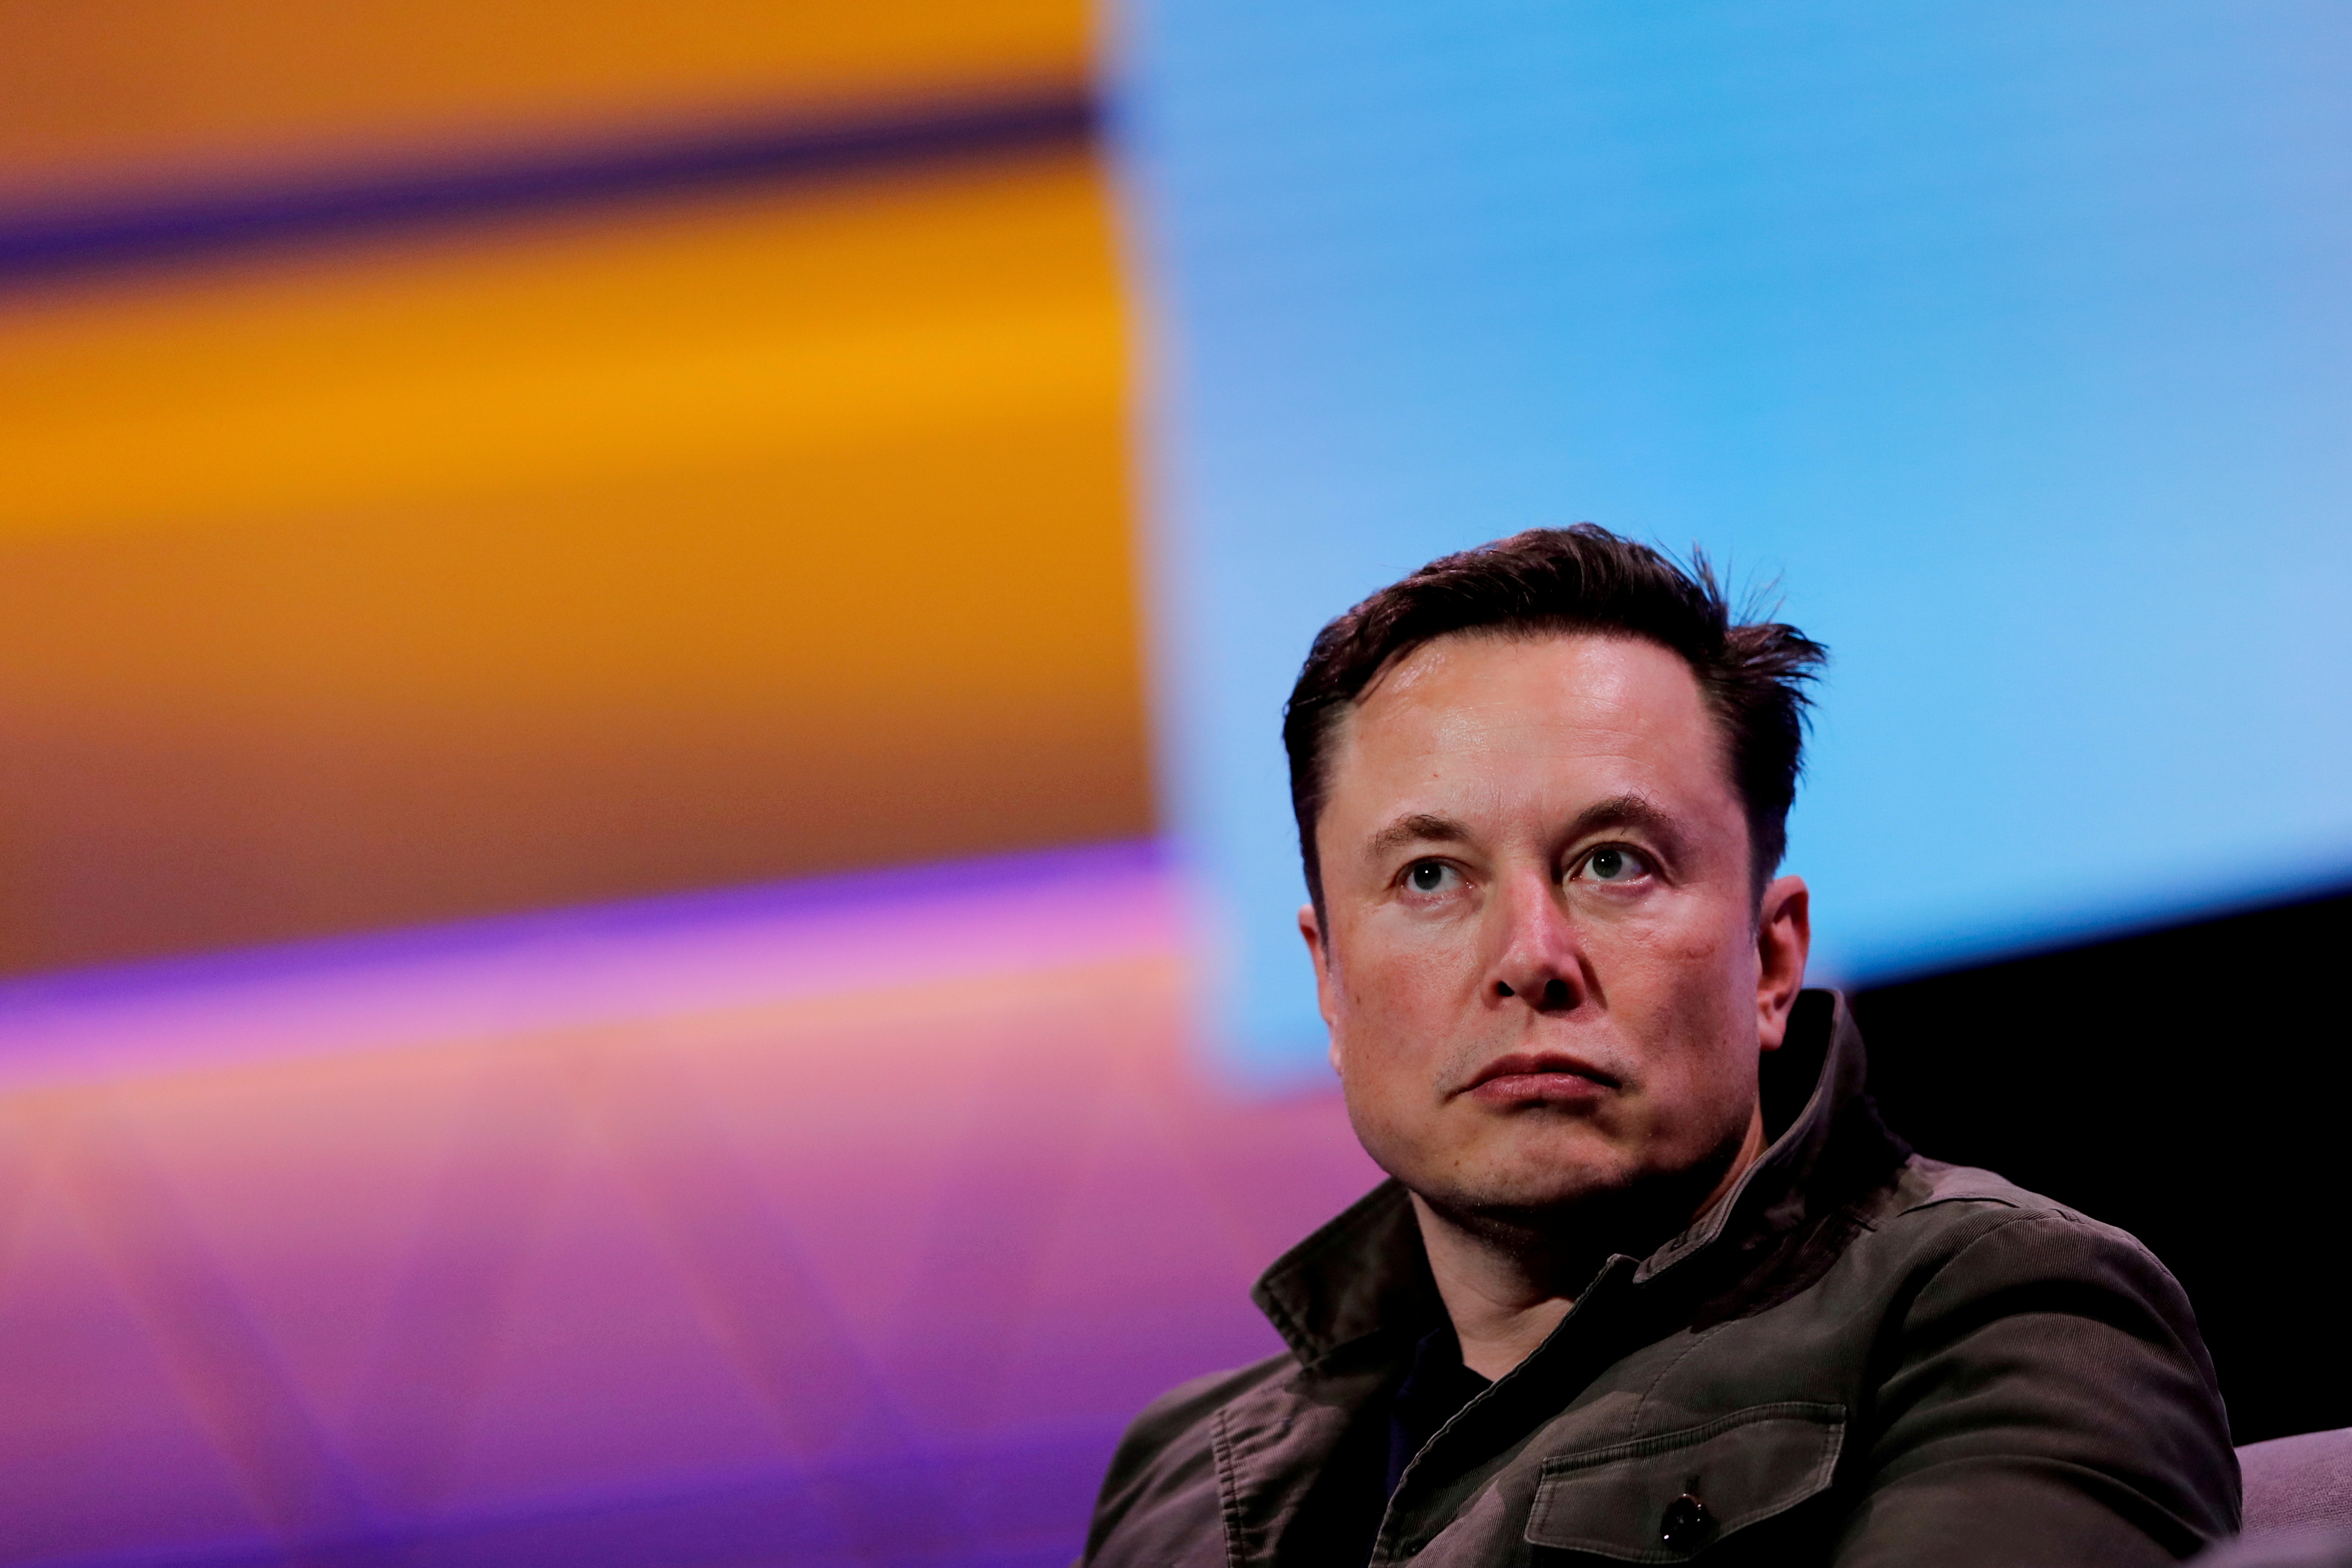 Elon Musk, owner of SpaceX and CEO of Tesla, will appear in Sao Paulo and meet with Brazilian President Jair Bolsonaro (Reuters)